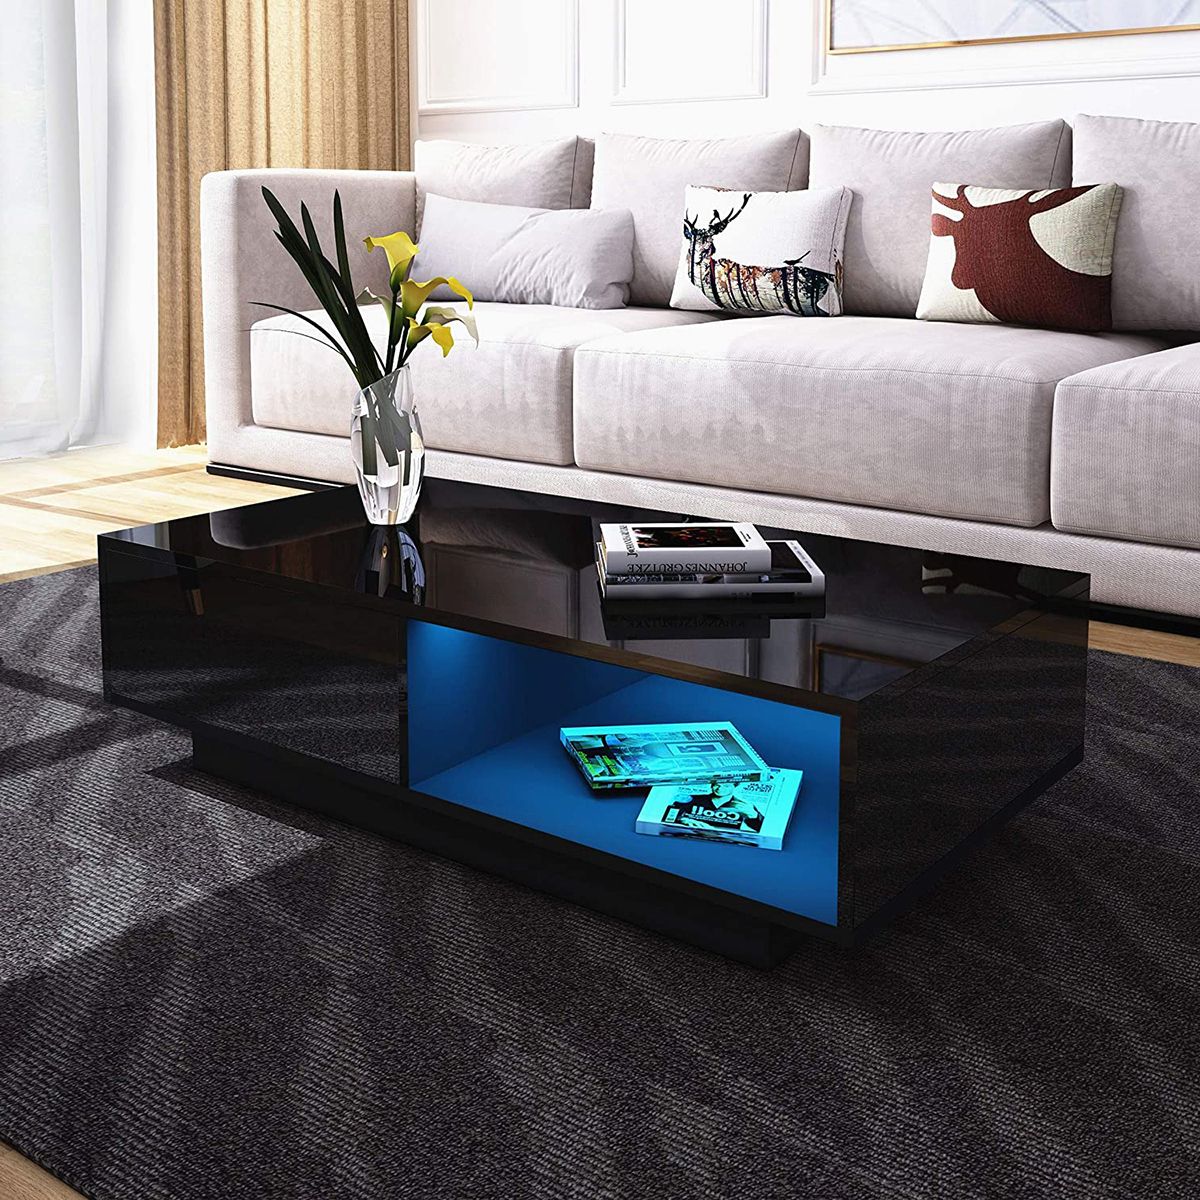 Modern High Gloss Coffee Table With Drawers, Led Sofa Side In Latest Aged Black Coffee Tables (View 17 of 20)